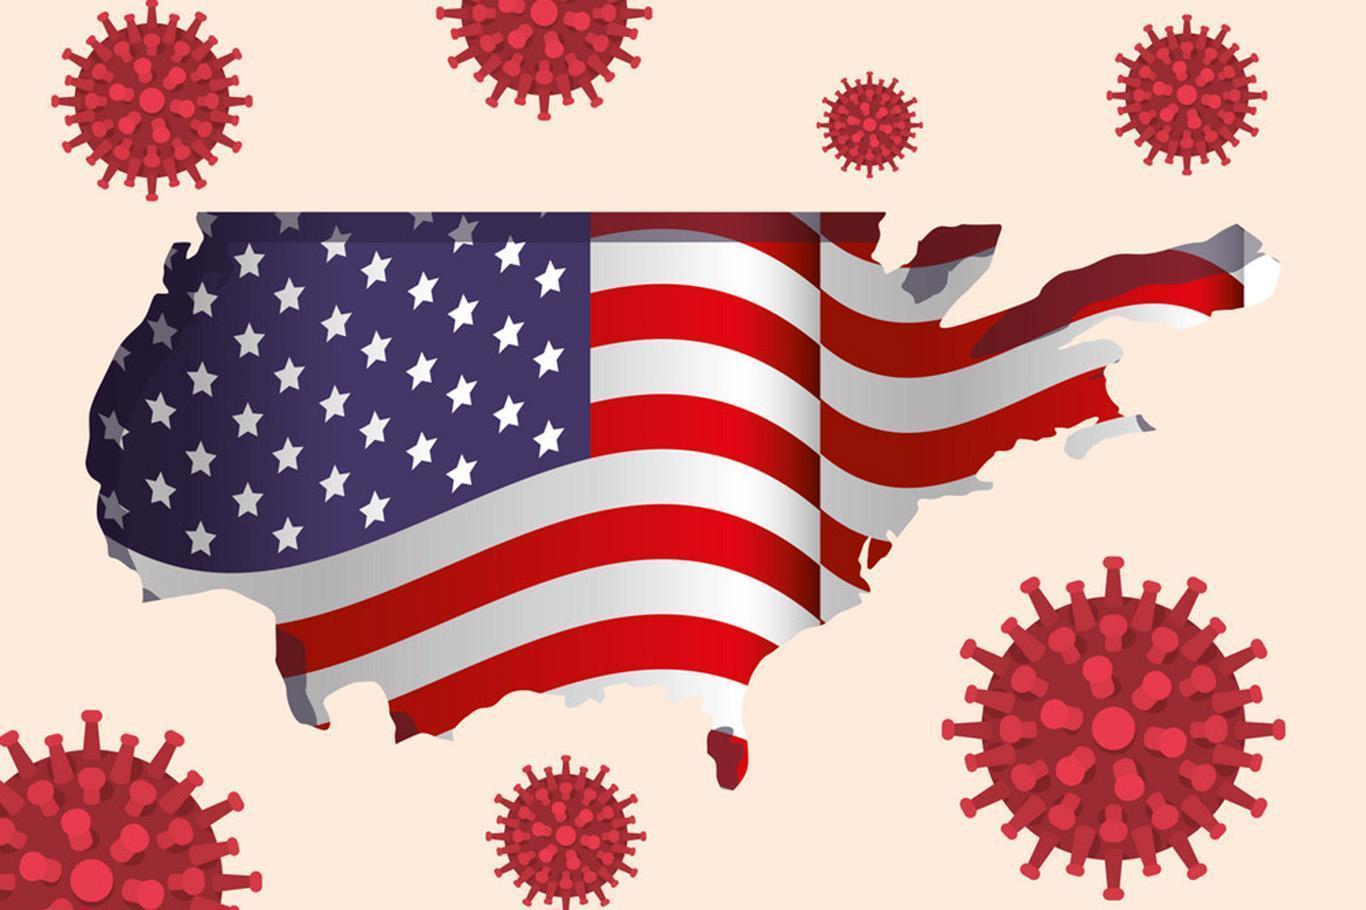 The United States reports 1,159 new deaths from coronavirus